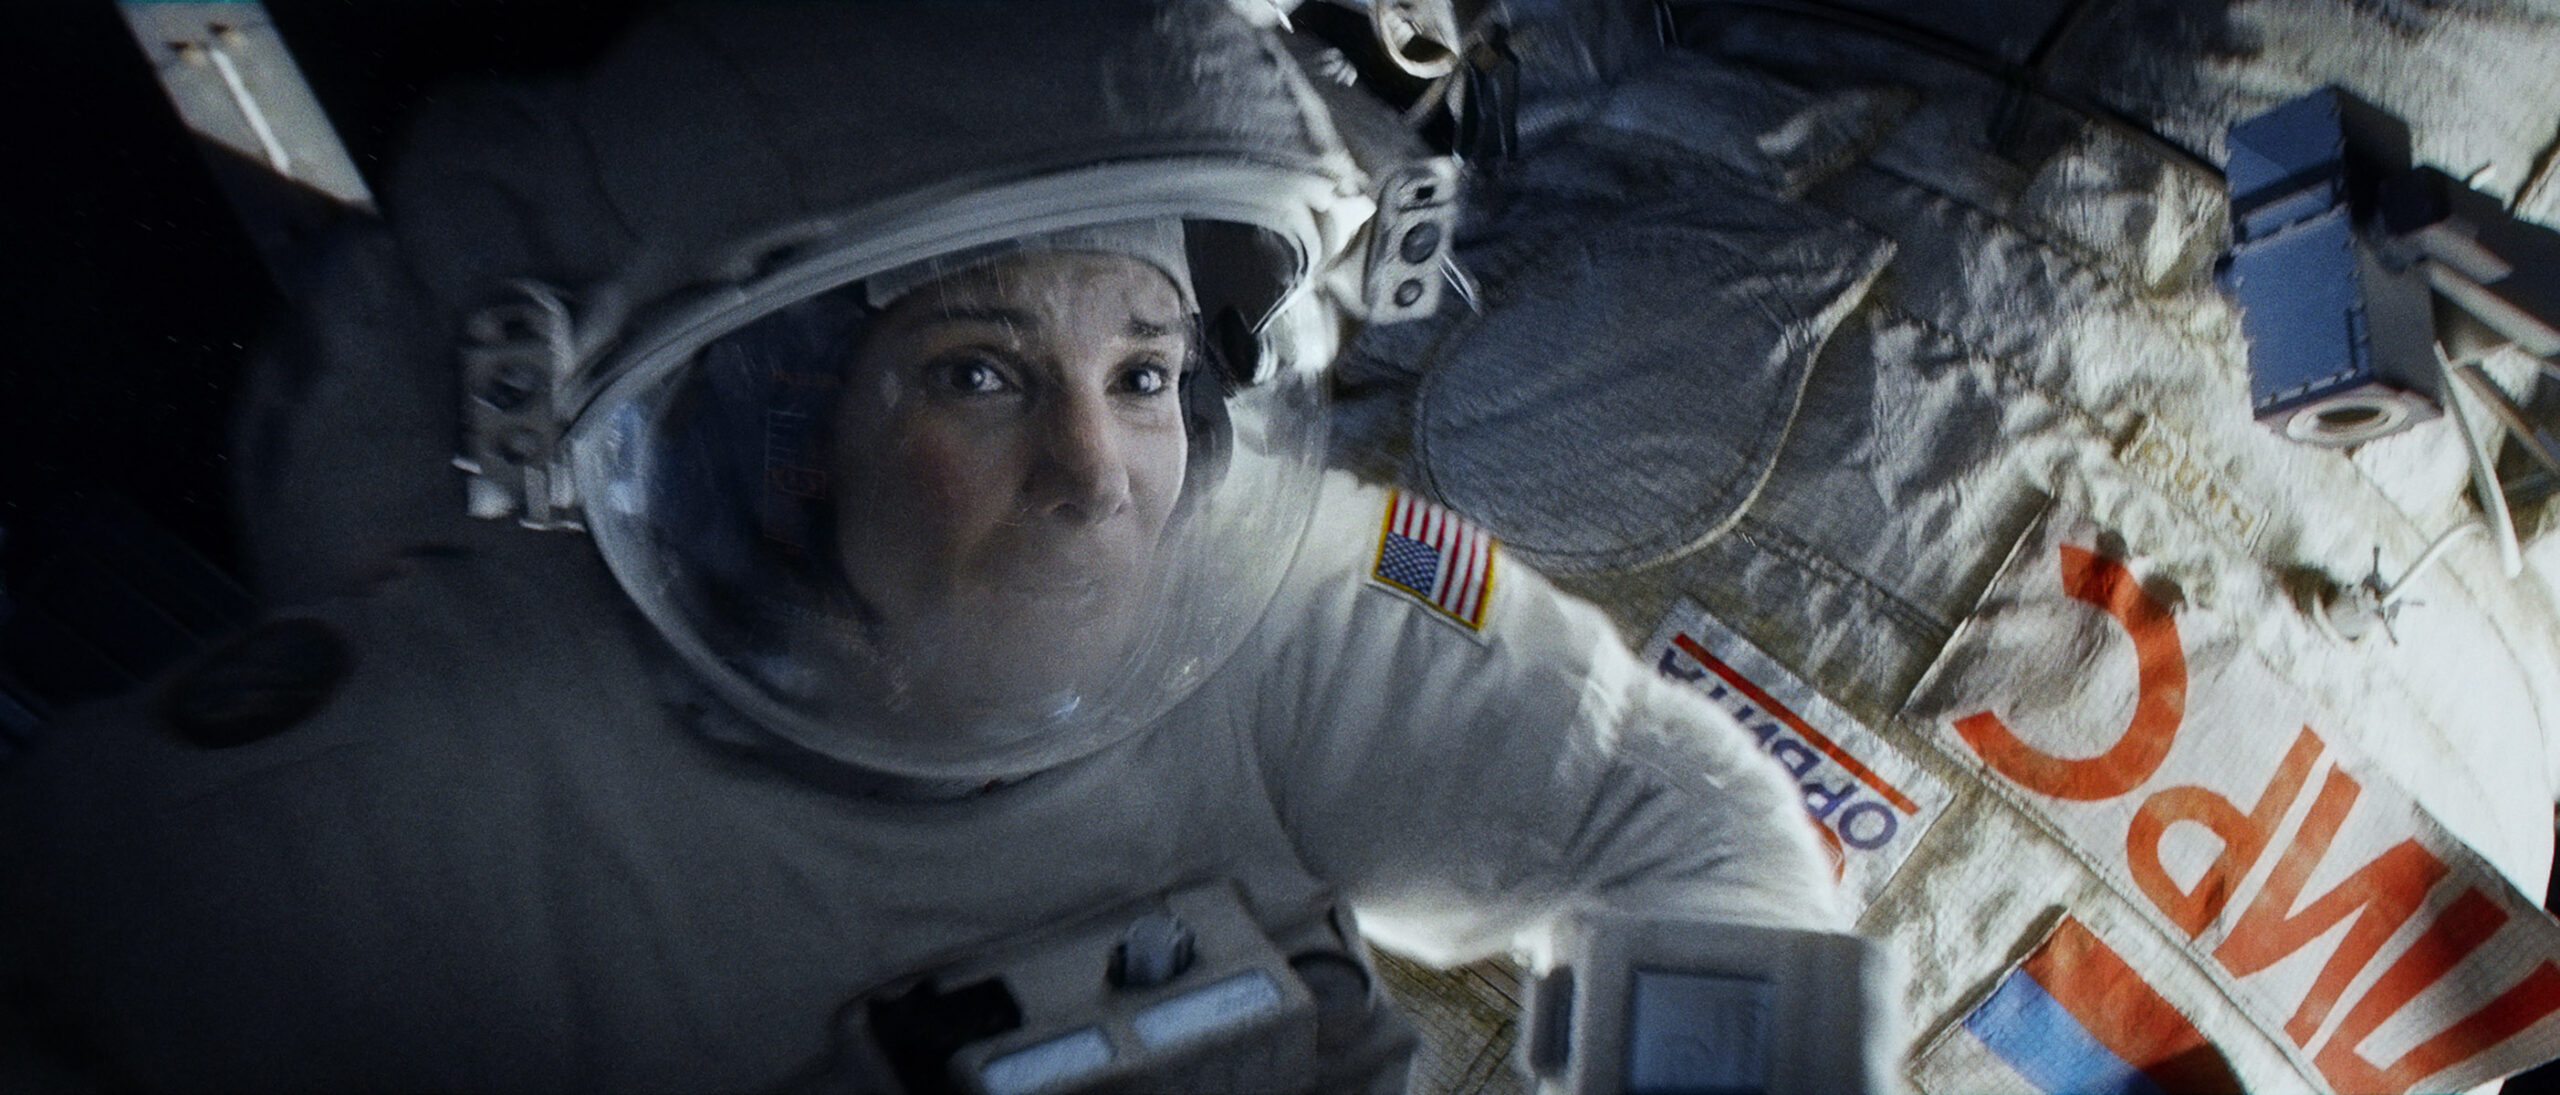 Neil DeGrasse Tyson’s Awesome Twitter Rant About Science Errors In ‘Gravity’